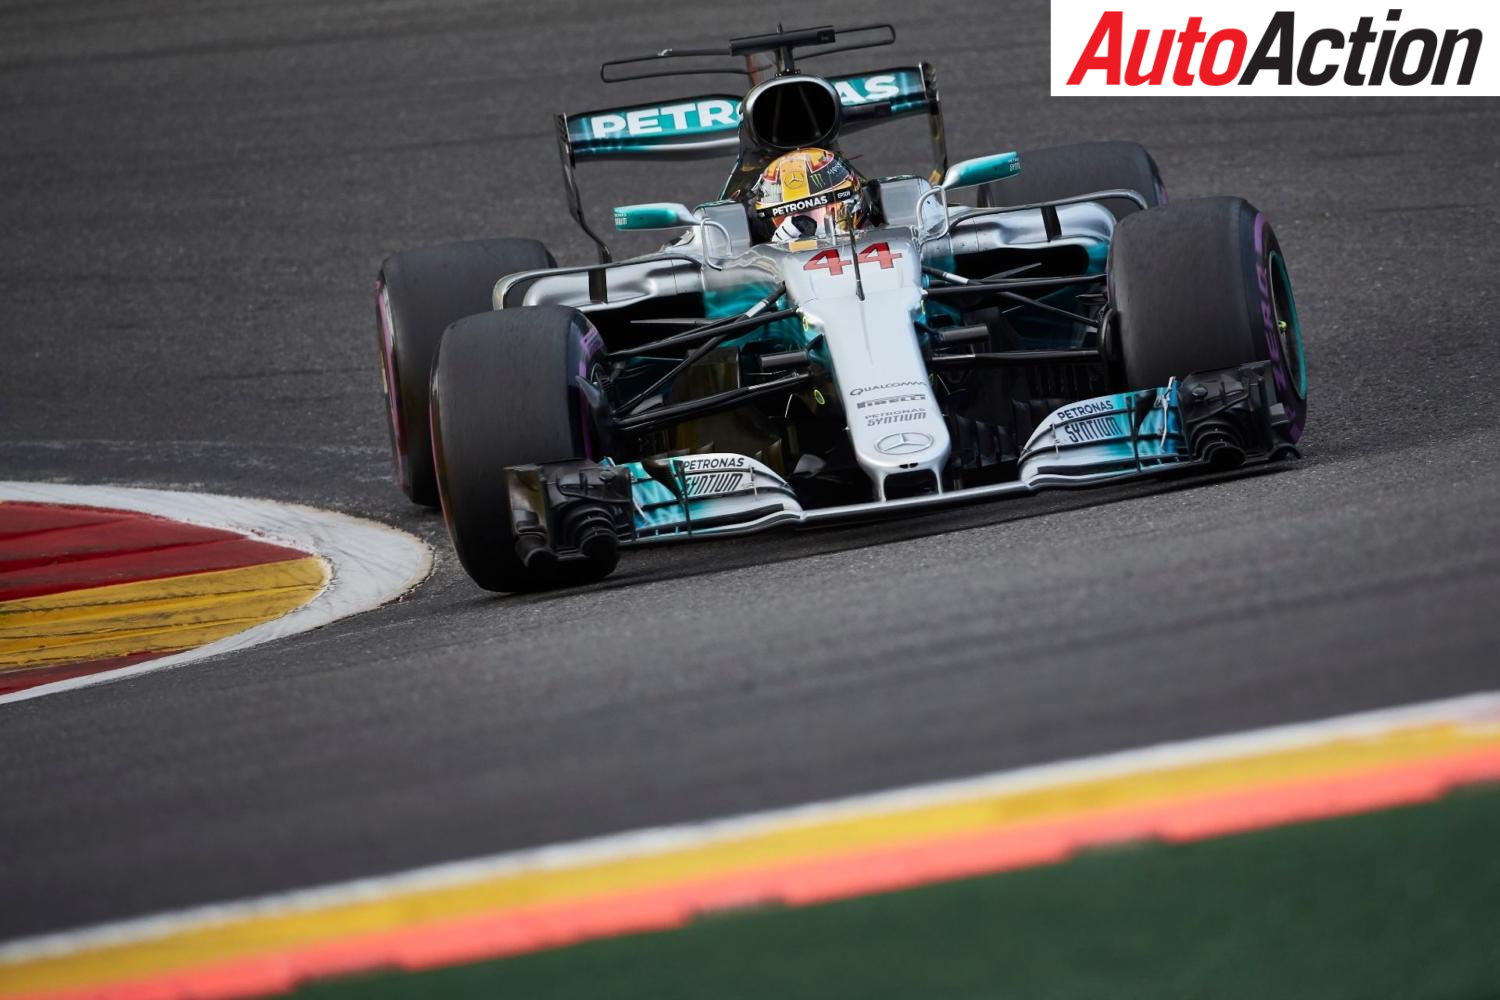 Lewis Hamilton will start from pole position in the Belgian Grand Prix - Photo: LAT